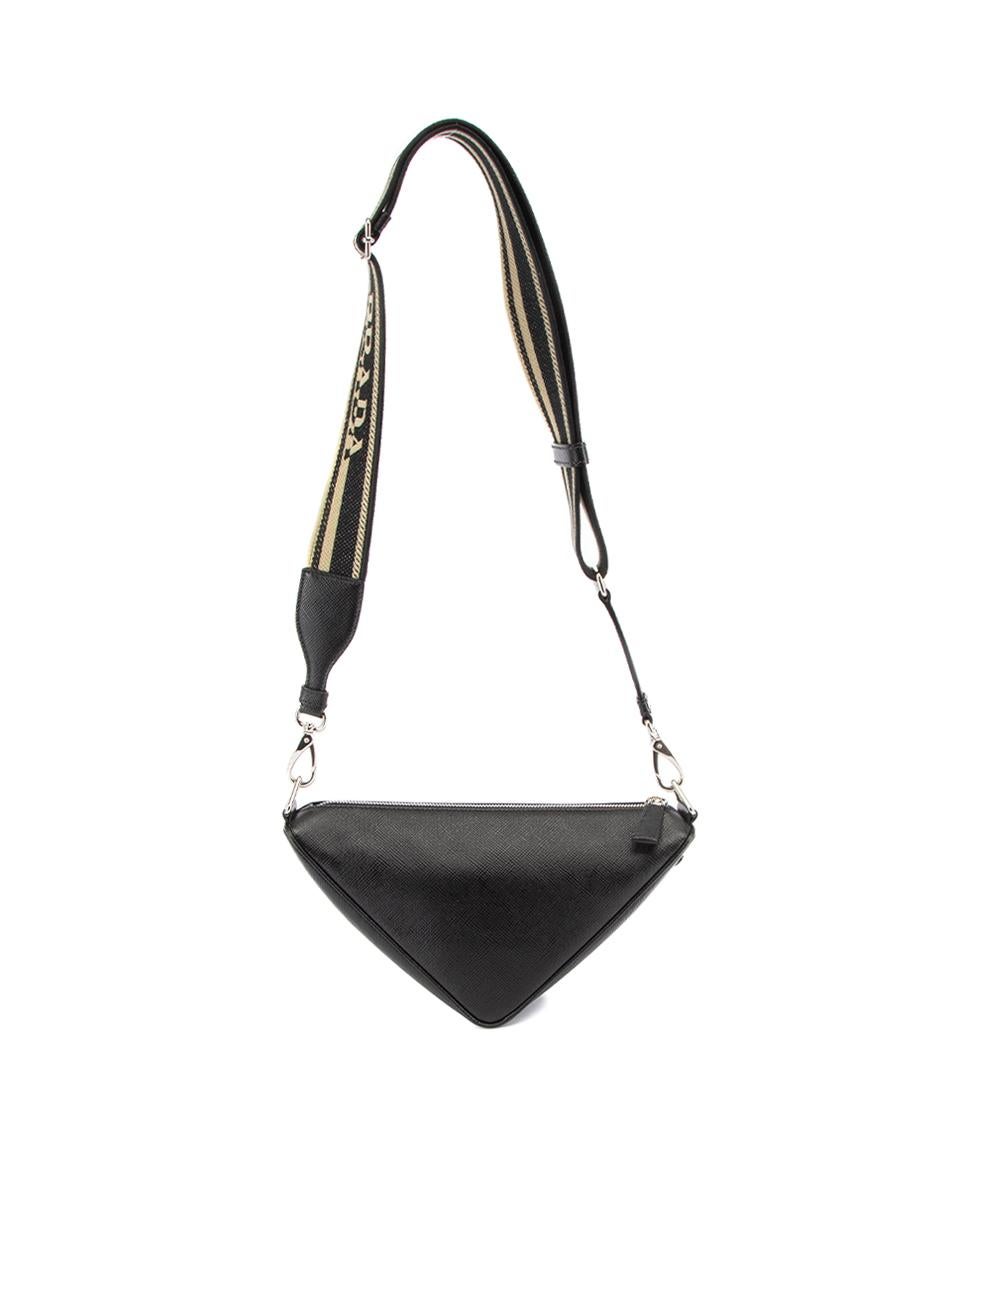 Prada Women's Black Leather Triangle Shoulder Bag In Good Condition In London, GB